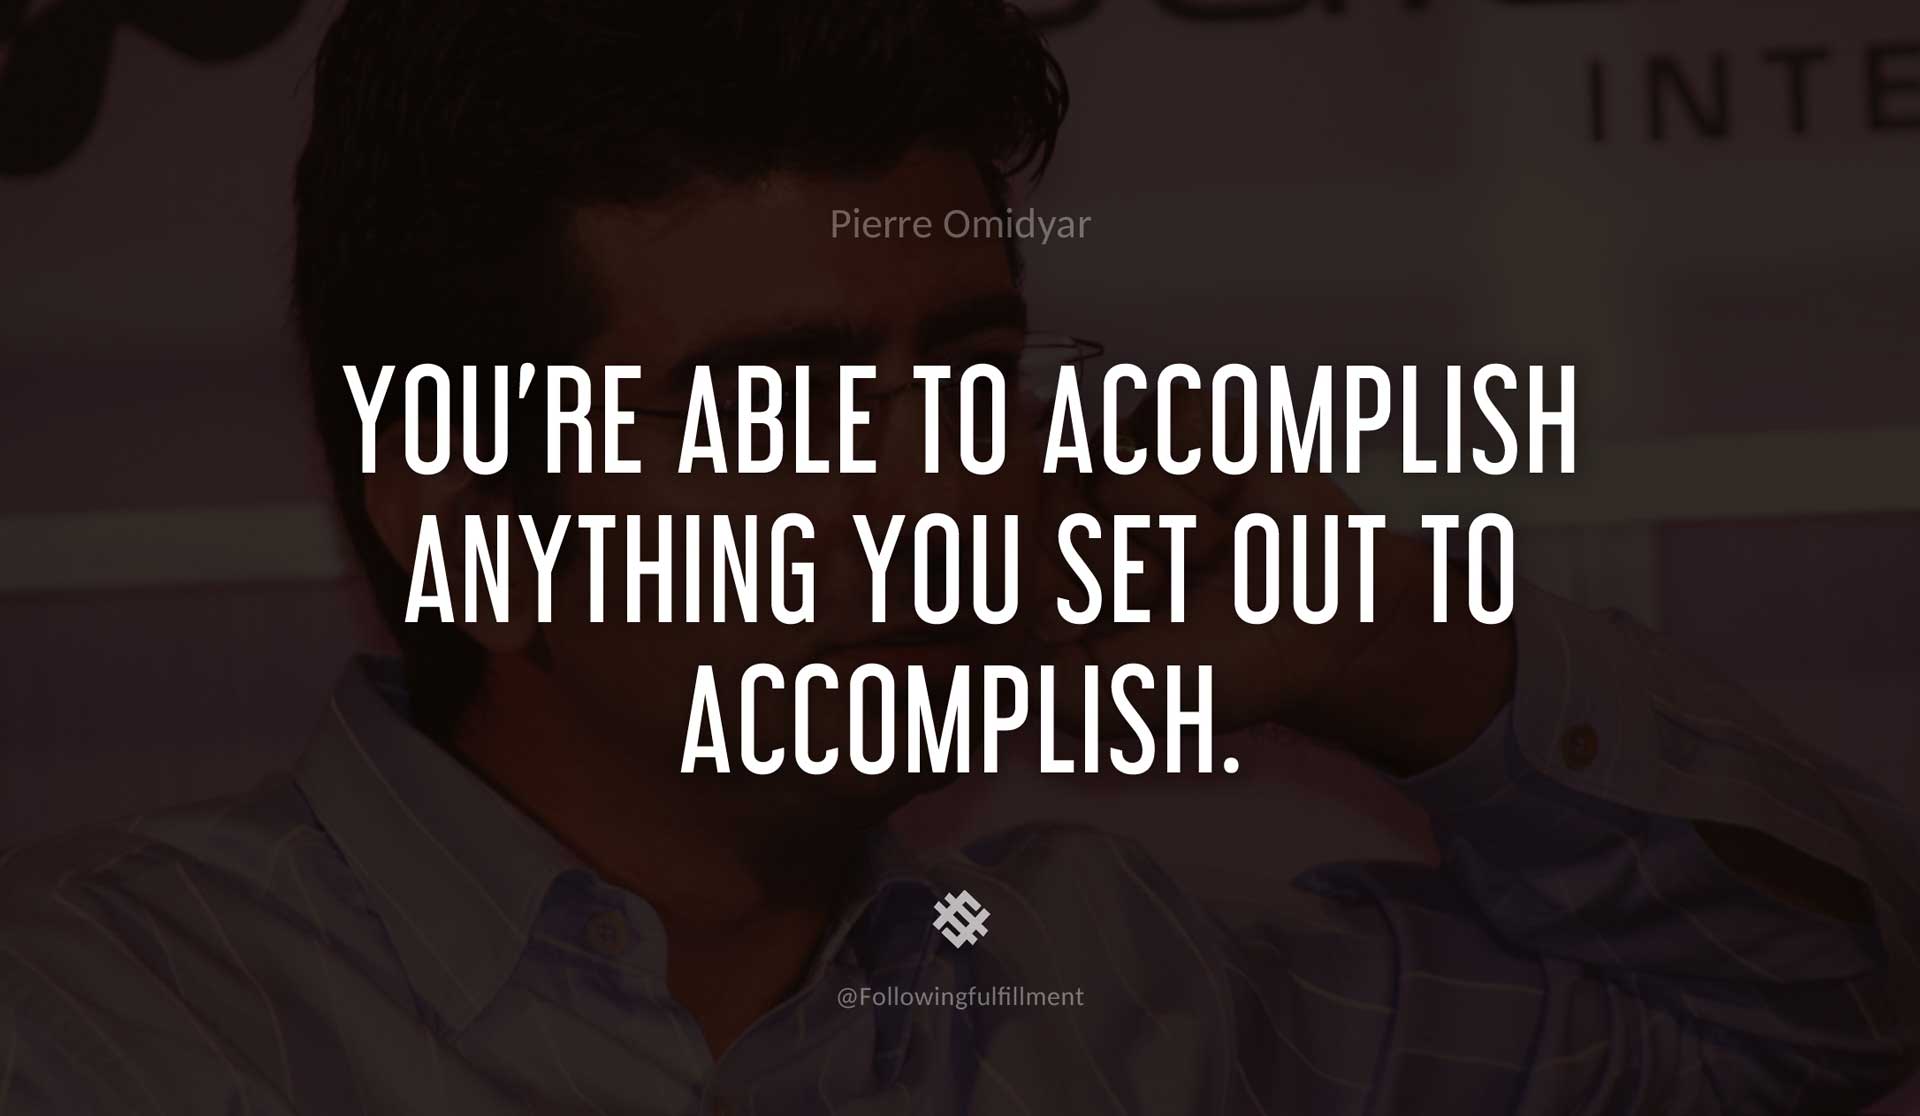 You're-able-to-accomplish-anything-you-set-out-to-accomplish.-PIERRE-OMIDYAR-Quote.jpg